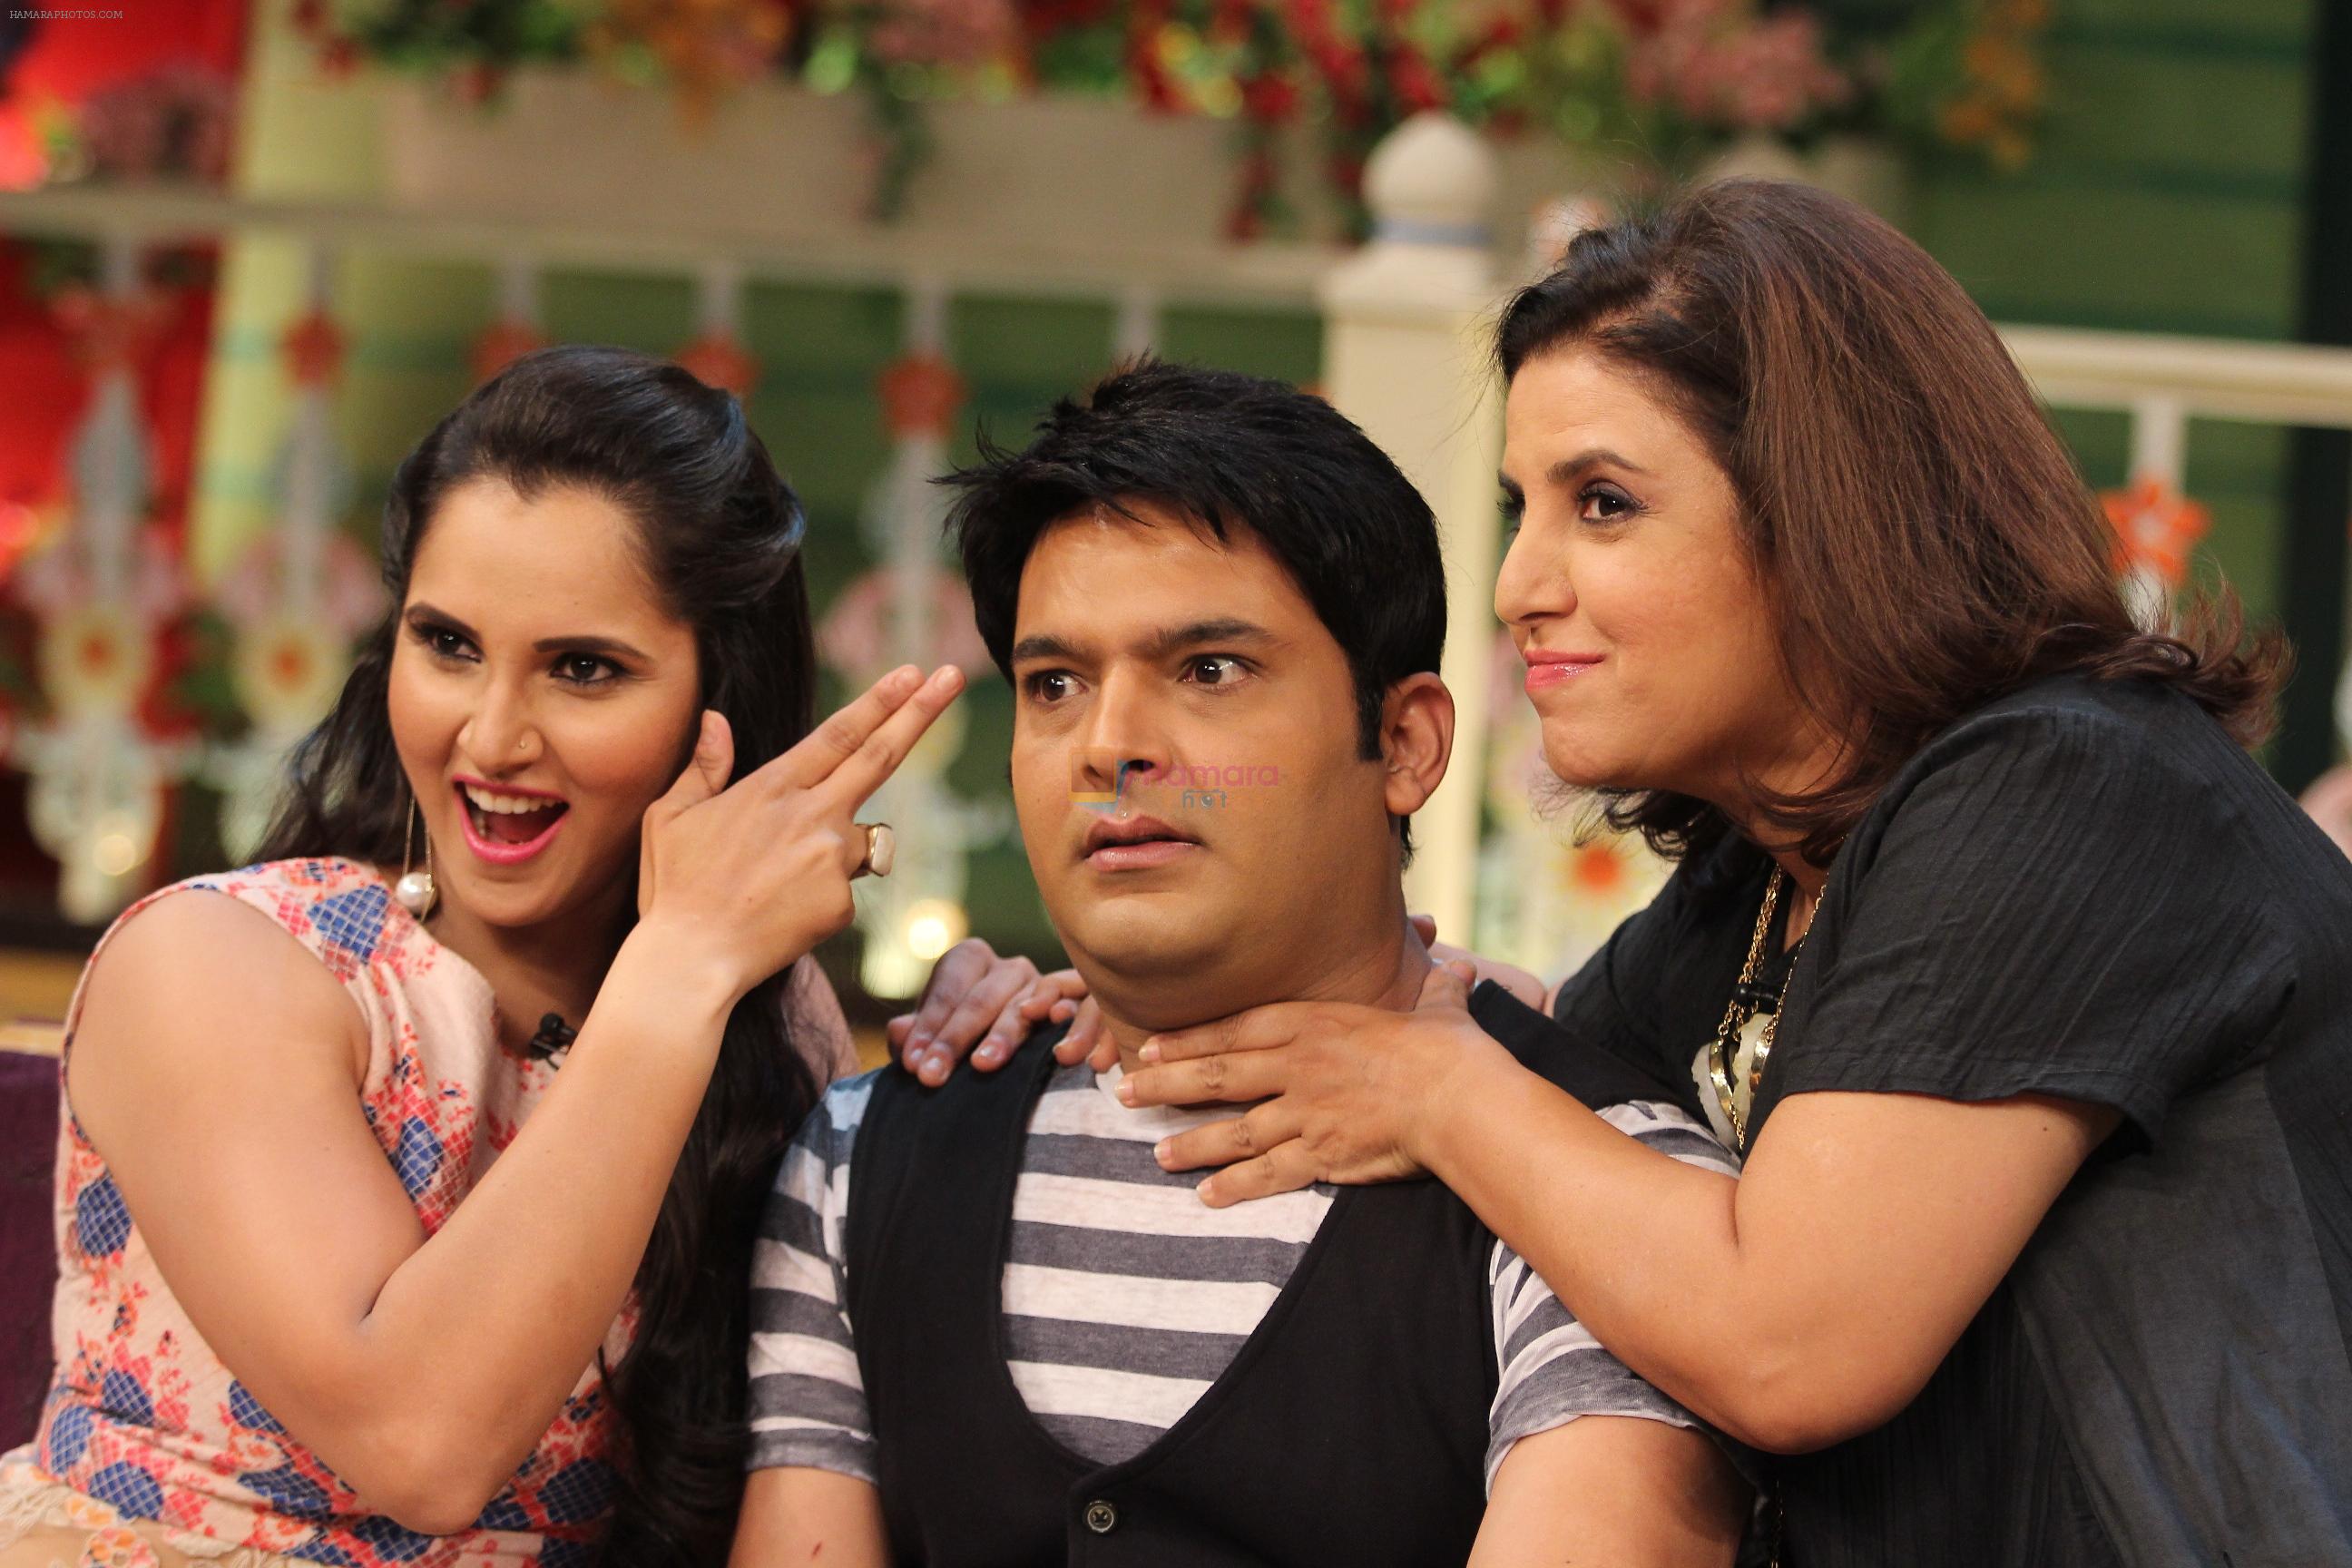 Farah Khan and Sania Mirza on the set of The Kapil Sharma Show in Mumbai on 18th May 2016